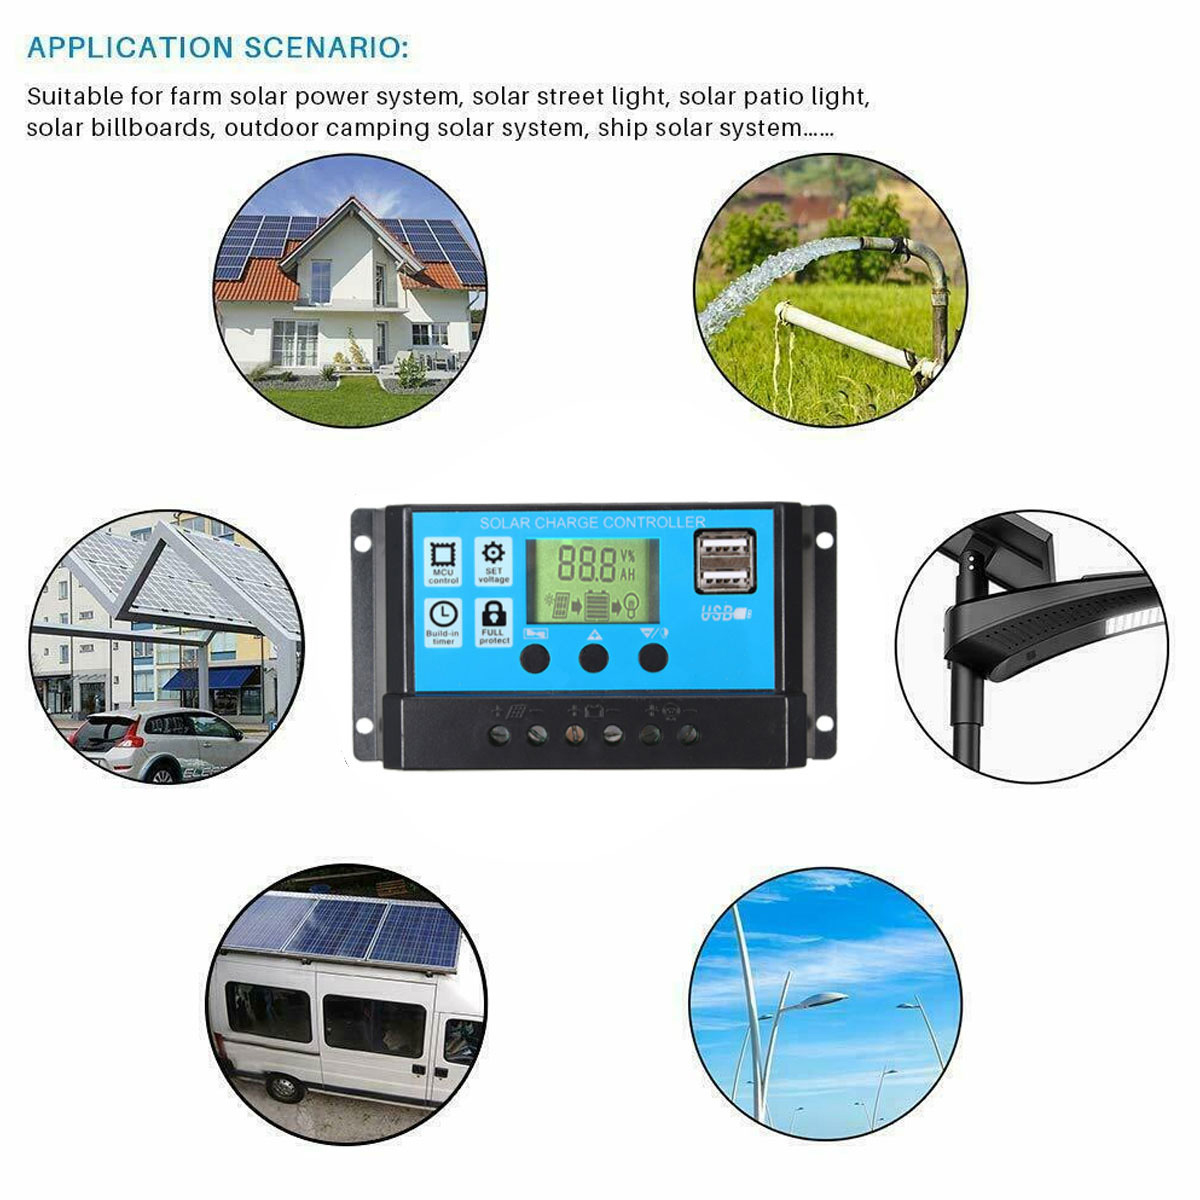 50W-Solar-Power-System-Inverter-Kit-Solar-Panel-Battery-Charger-Complete-Controller-Home-Grid-Camp-P-1935367-4